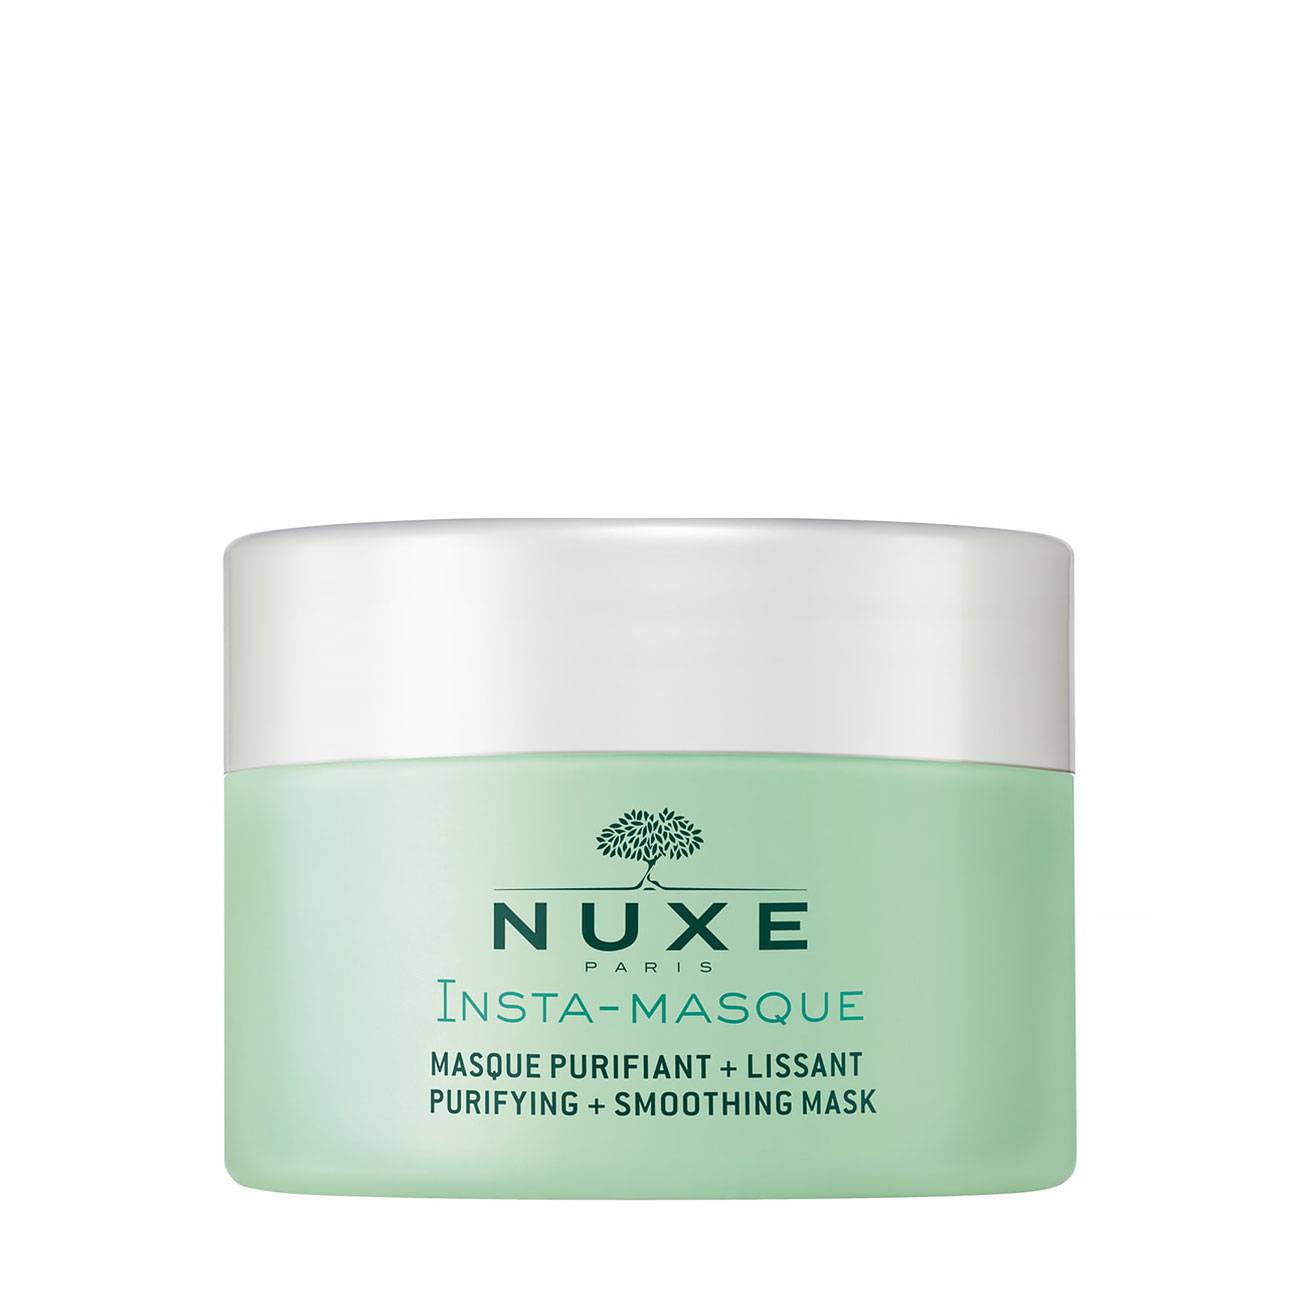 Masca tratament Nuxe INSTA-MASQUE PURIFYING+SMOOTHING MASK 50ml cu comanda online